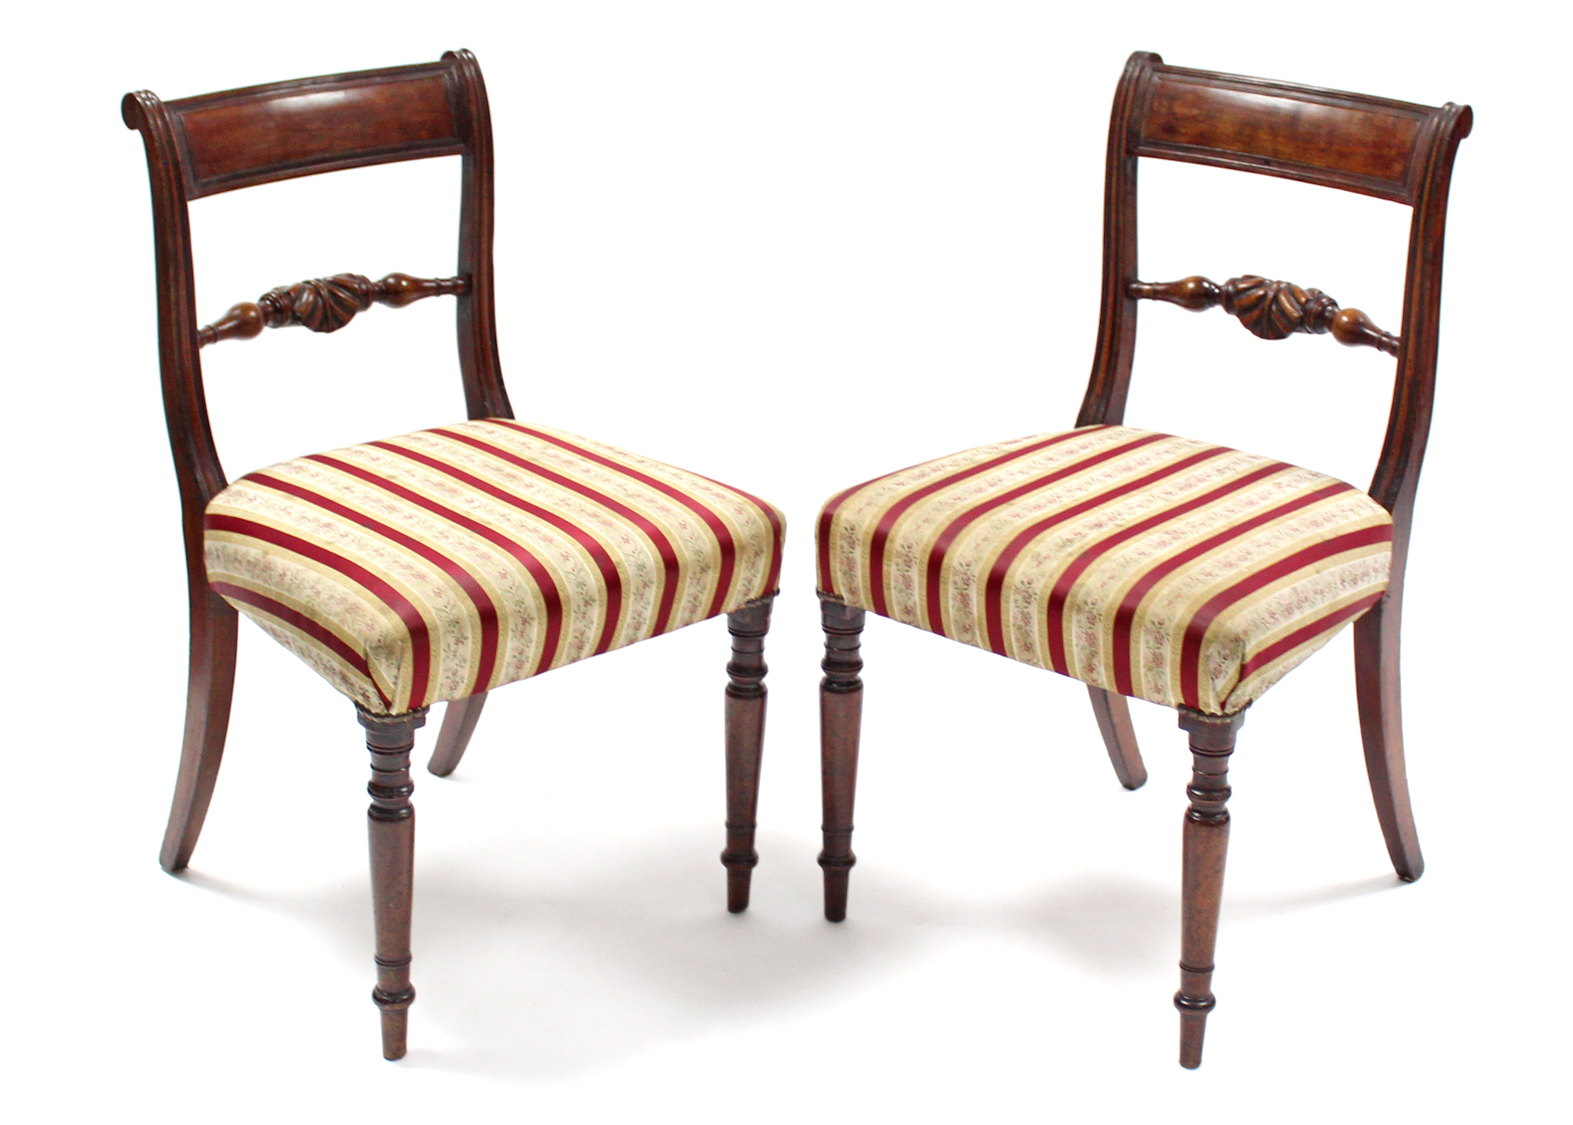 A pair of Regency-style mahogany bow-back dining chairs with padded seats & turned tapering legs.